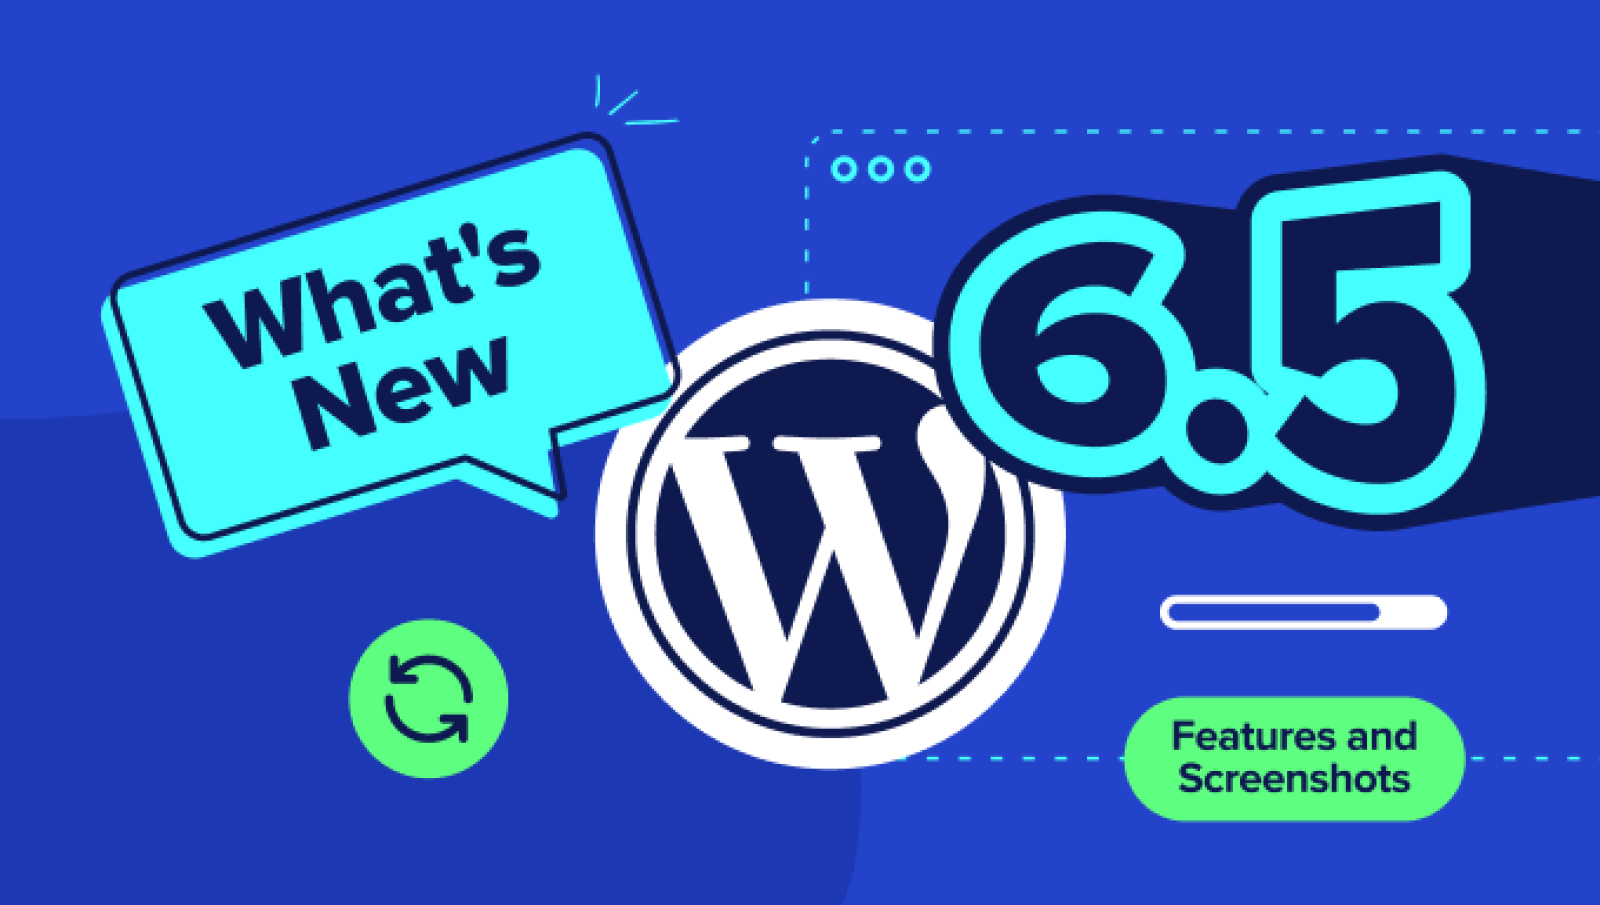 What’s New in WordPress 6.5 (Options and Screenshots)